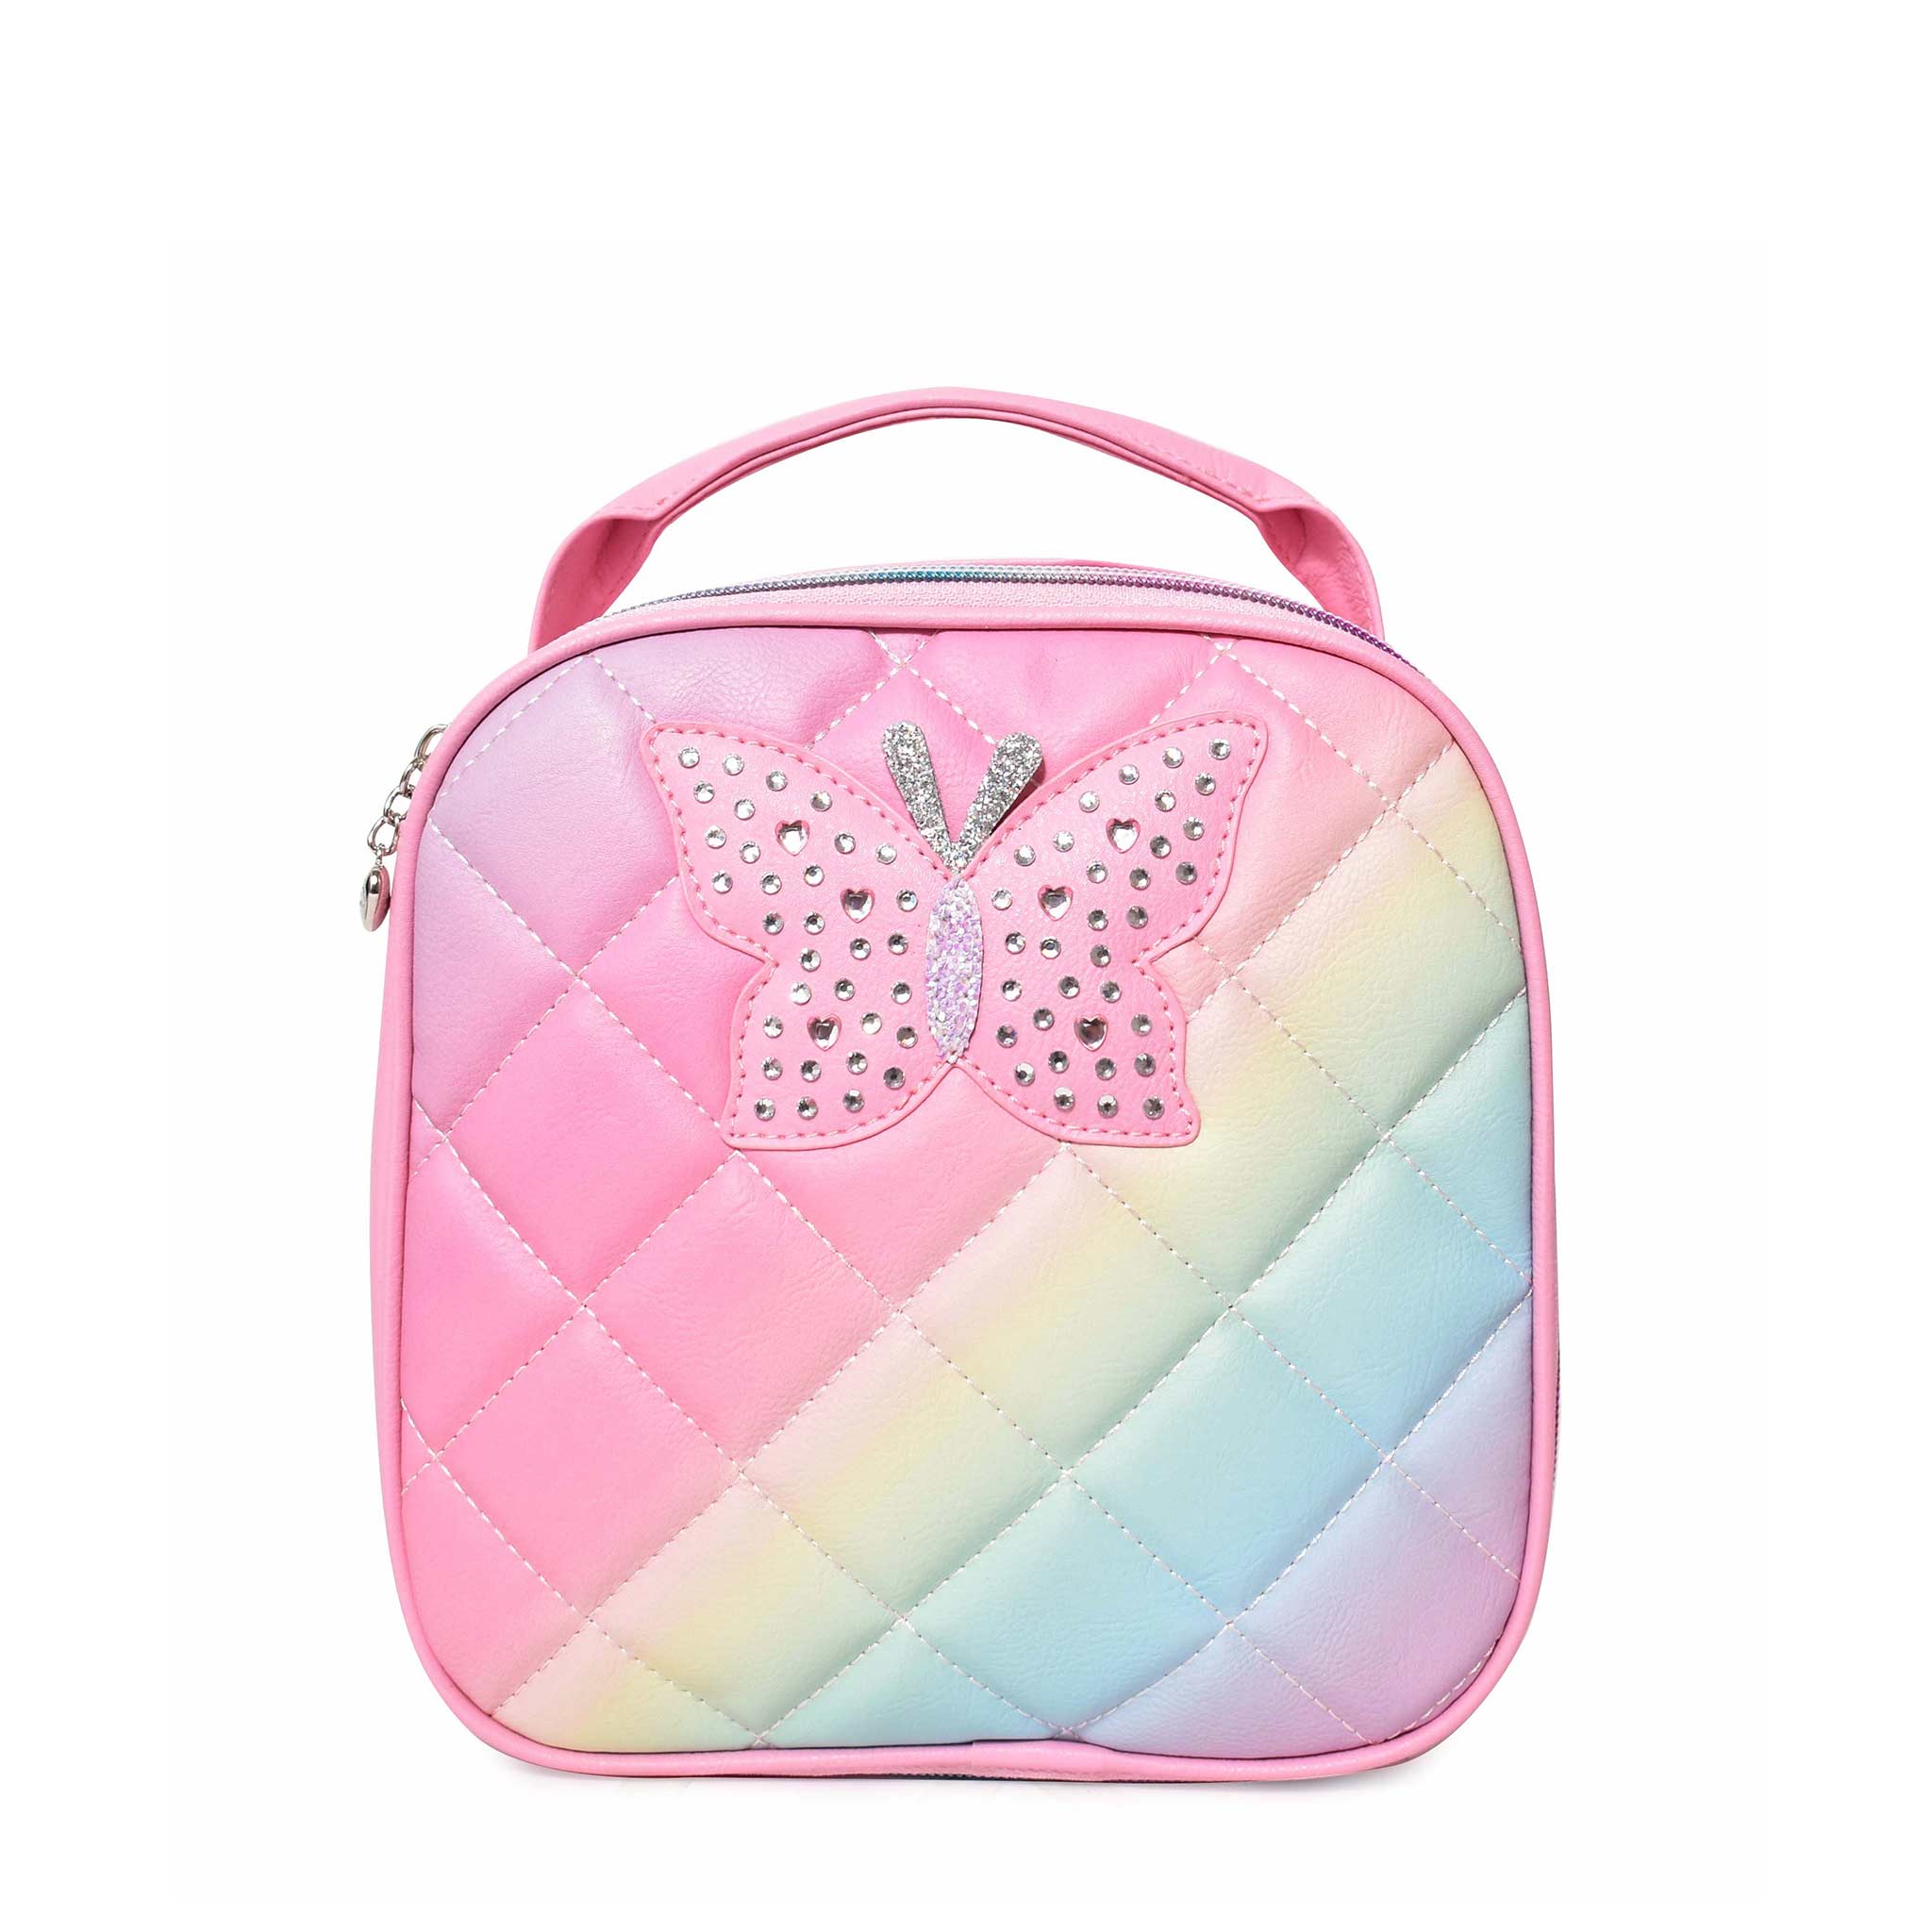 Front view of rainbow ombre quilted lunch bag embellished with a pink rhinestone butterfly.